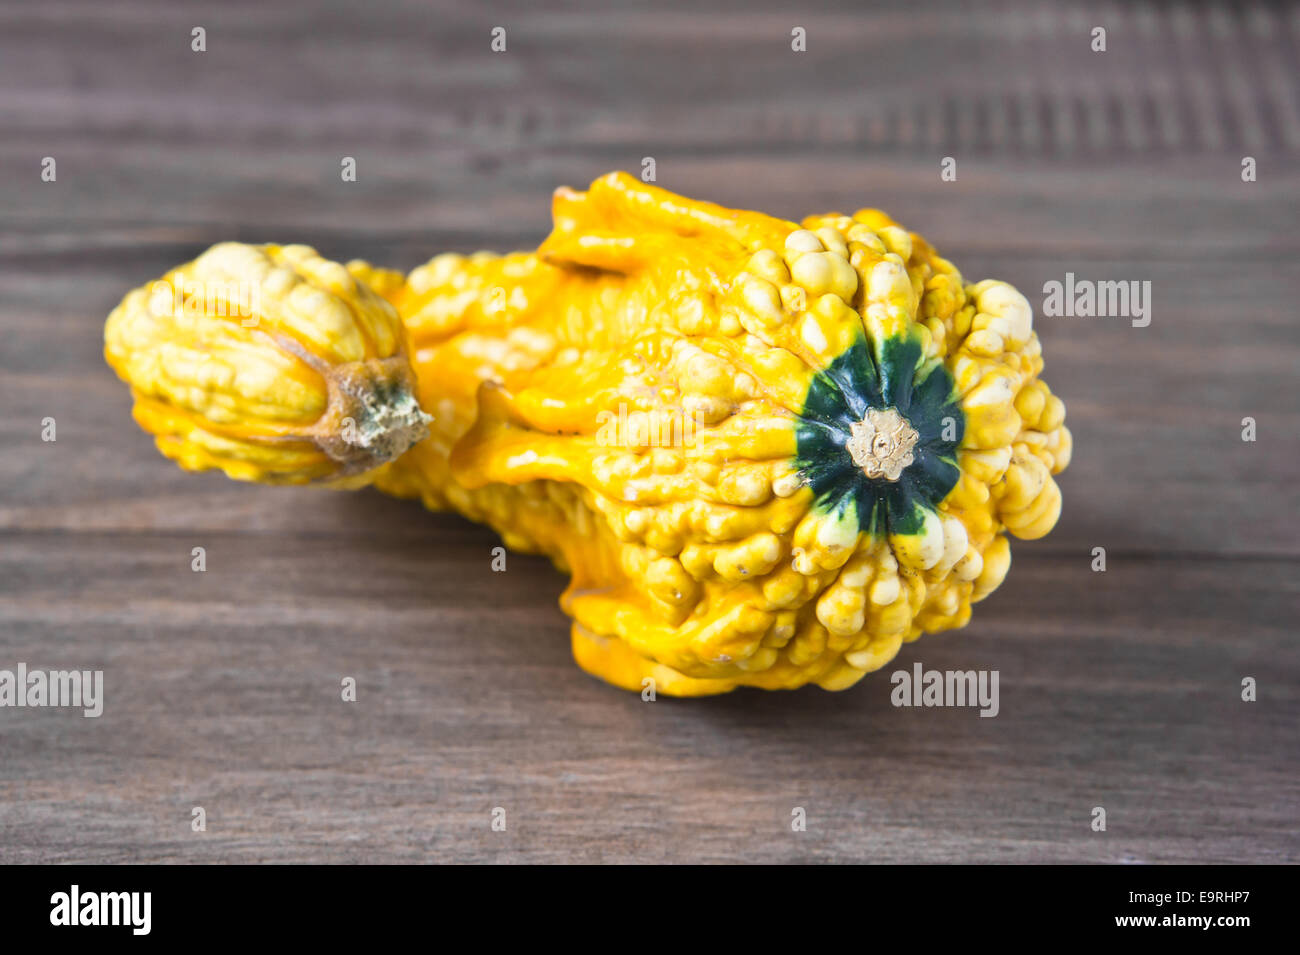 A decorative yellow gourd on a wooden table top.  Shallow depth of field with focus on front only. Stock Photo